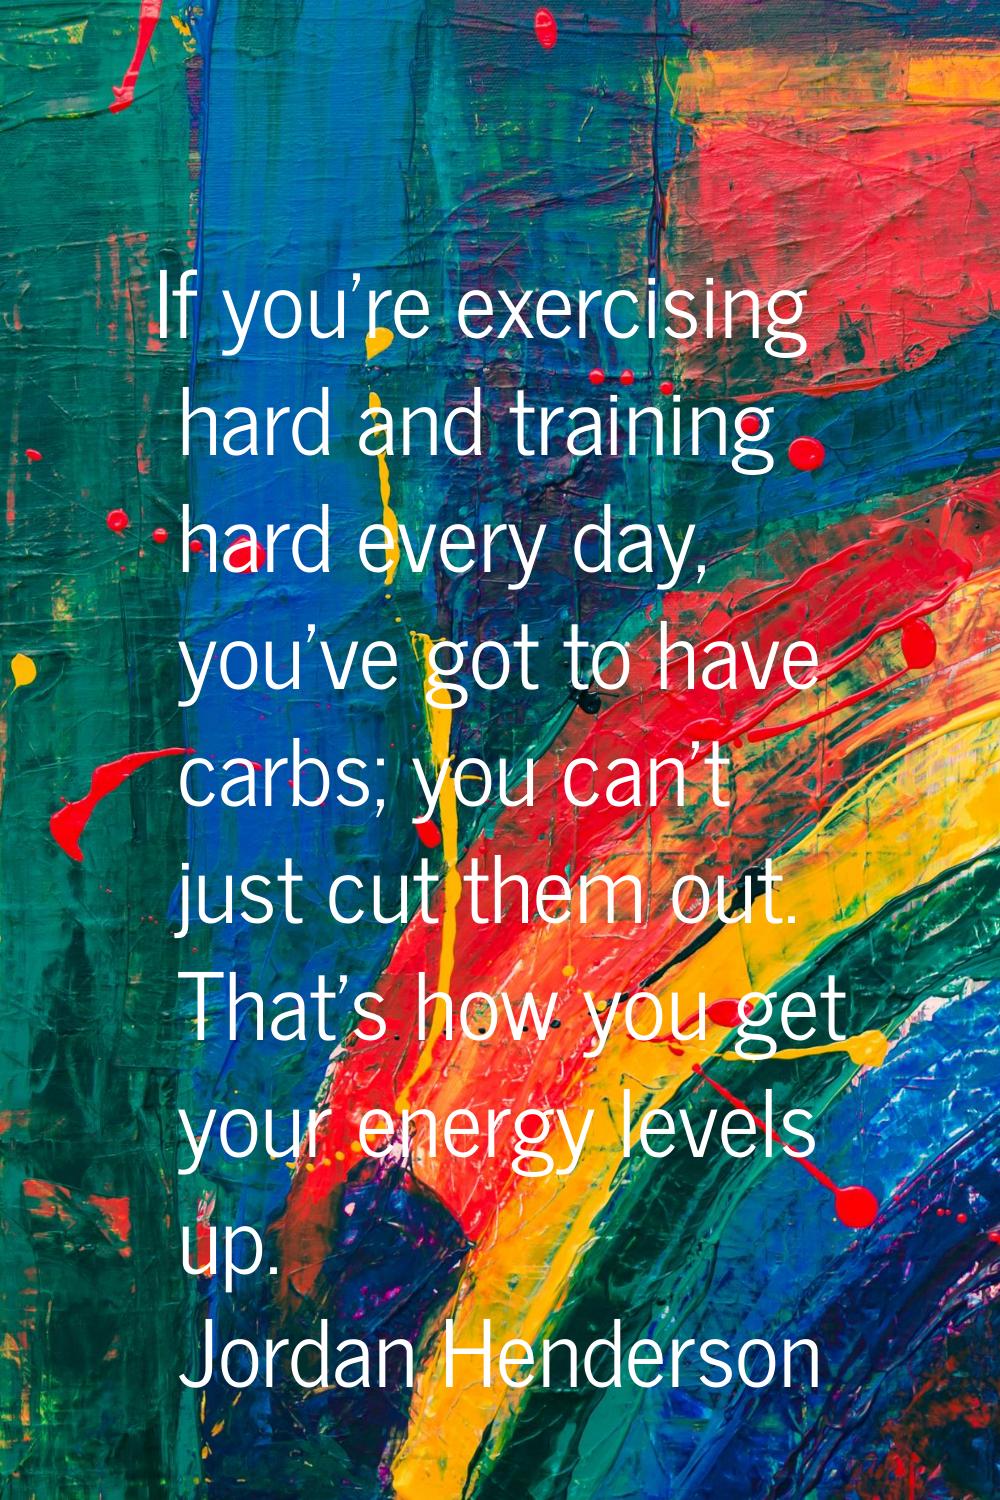 If you're exercising hard and training hard every day, you've got to have carbs; you can't just cut